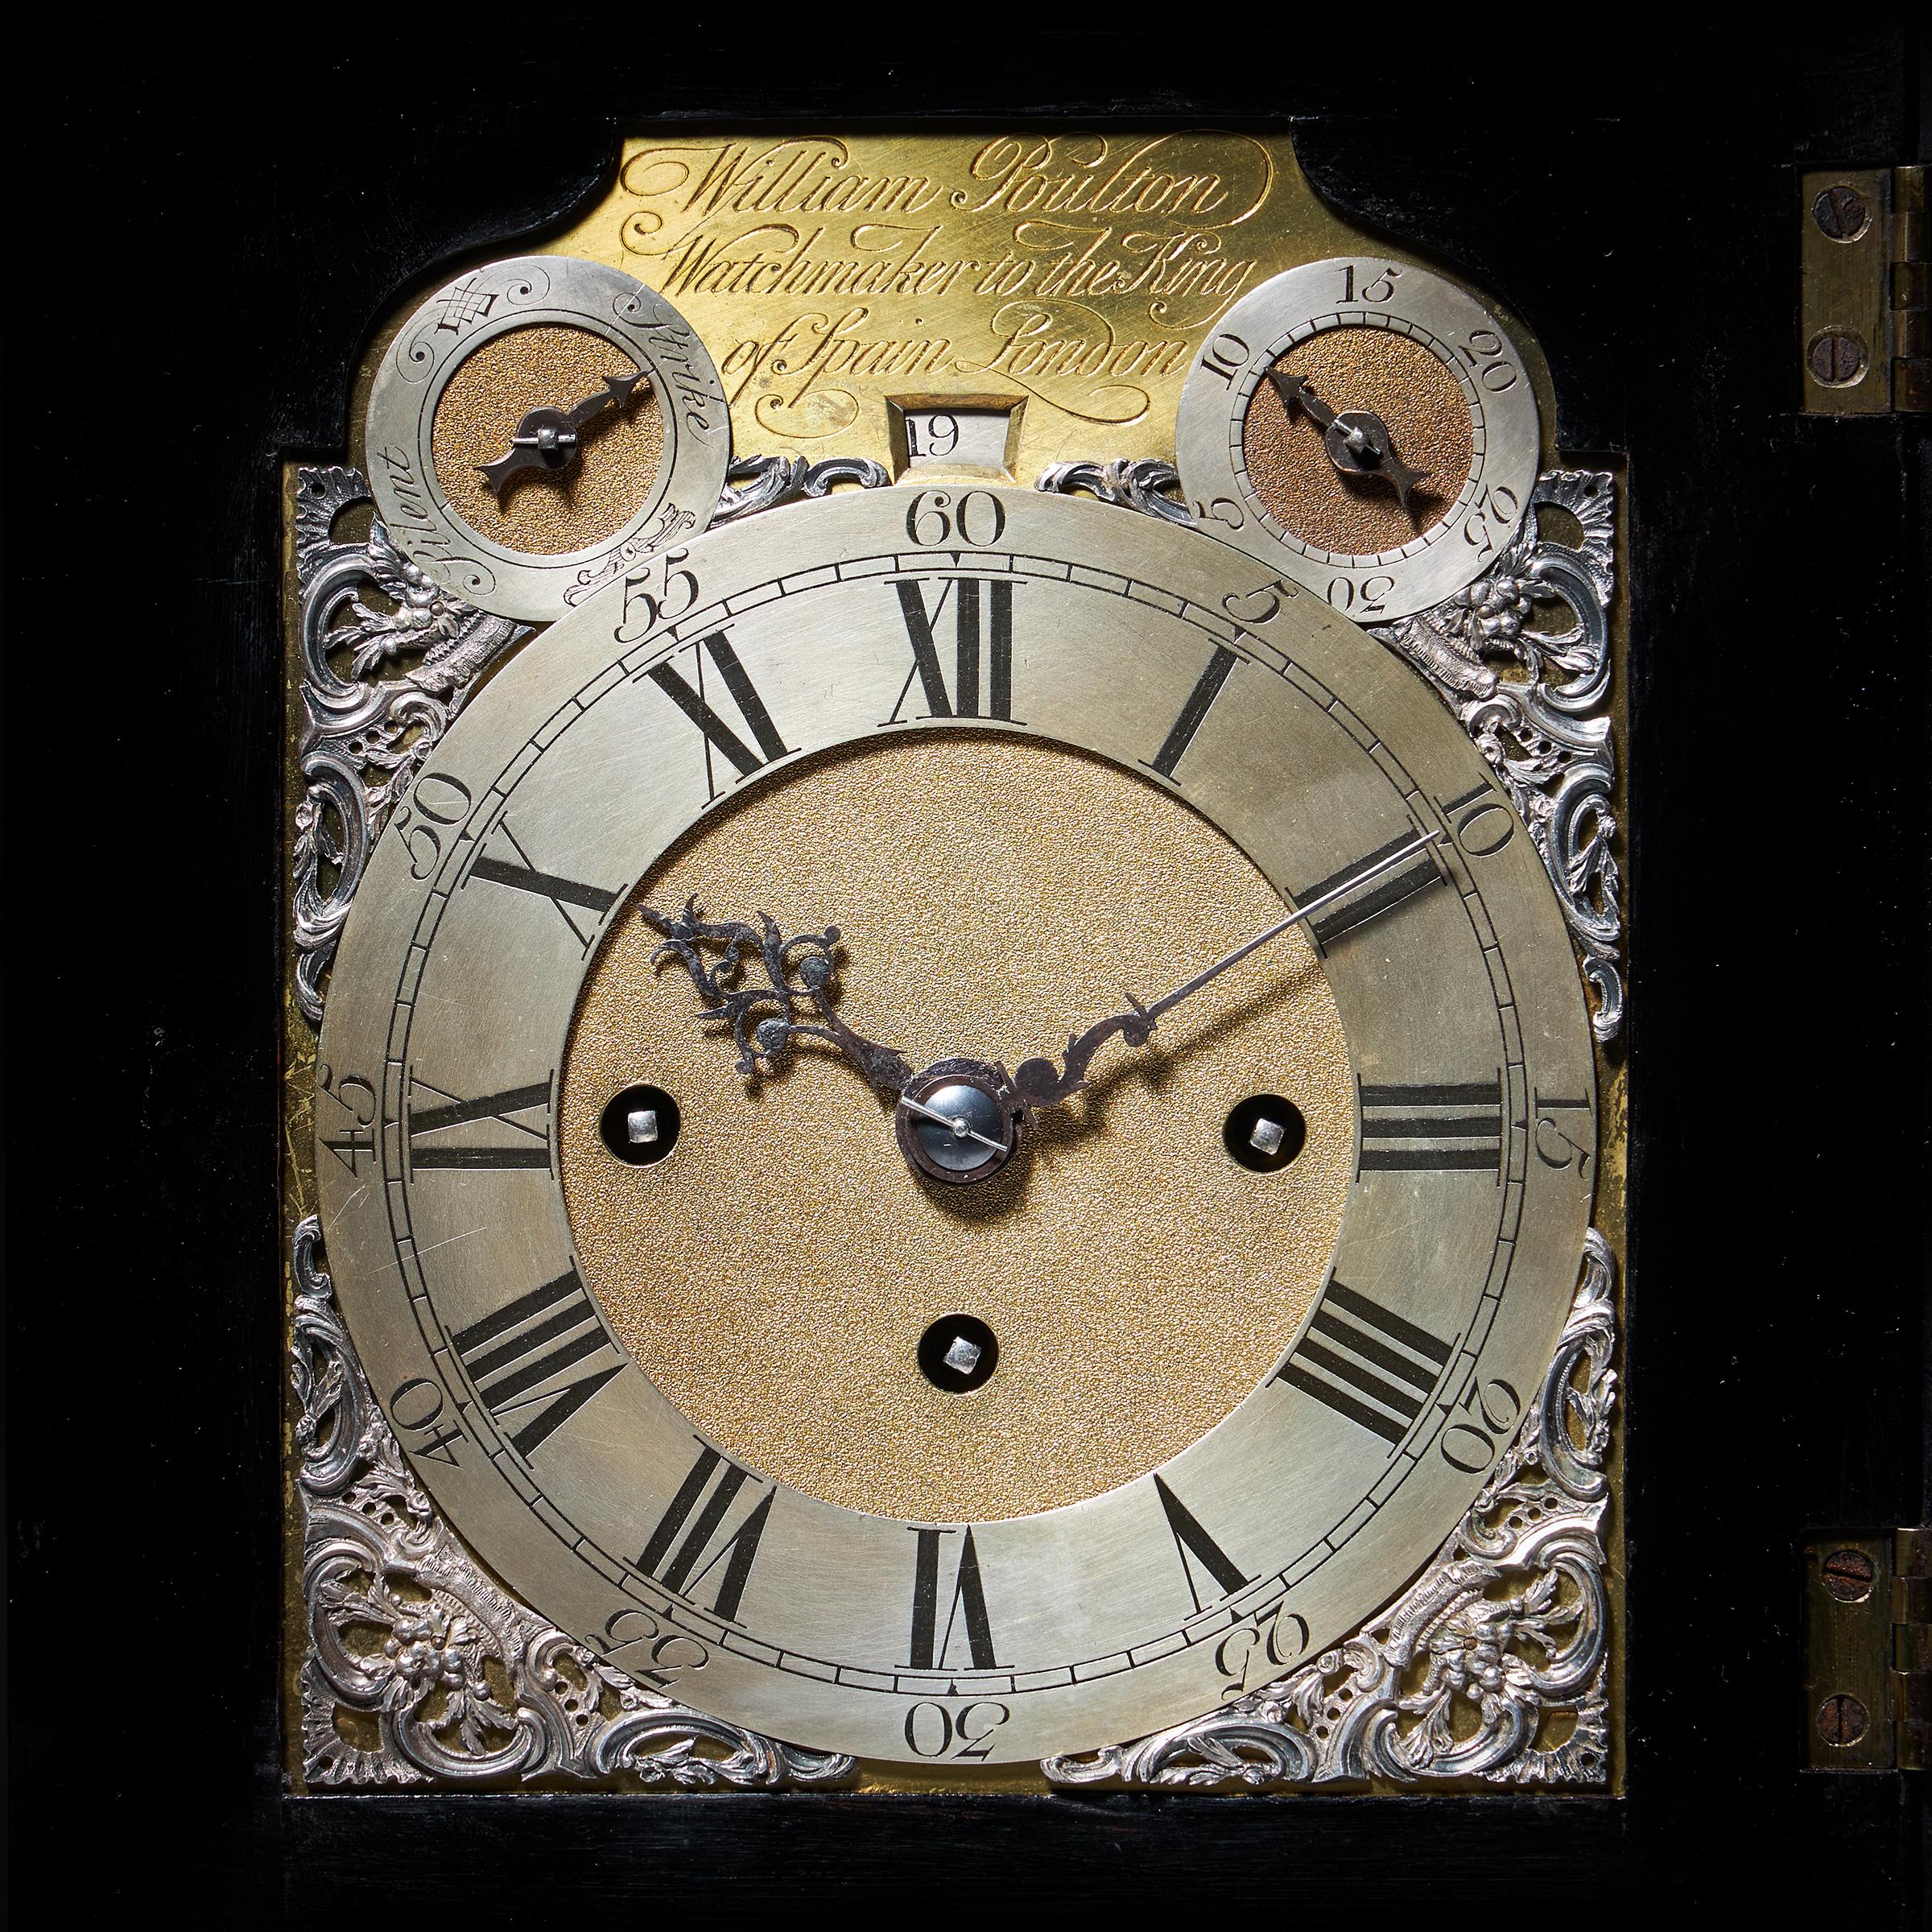 Rare 18th-Century Grande Sonnerie Striking table Clock by William Poulton For Sale 2